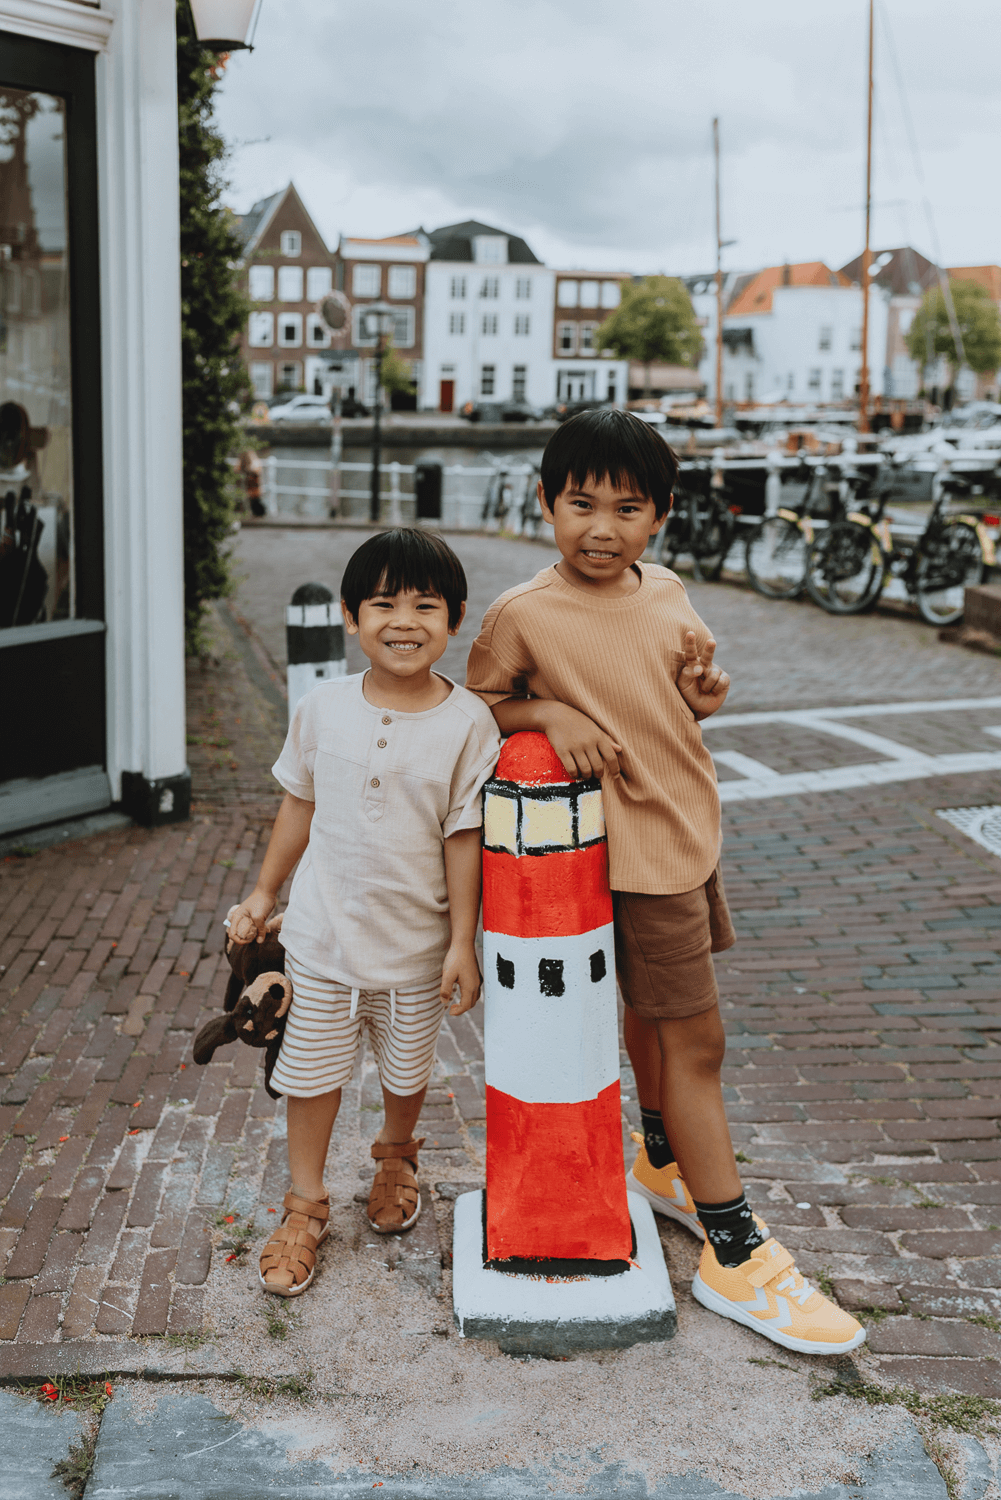 Summer holiday photos in Haarlem by Vicky McLachlan Photography